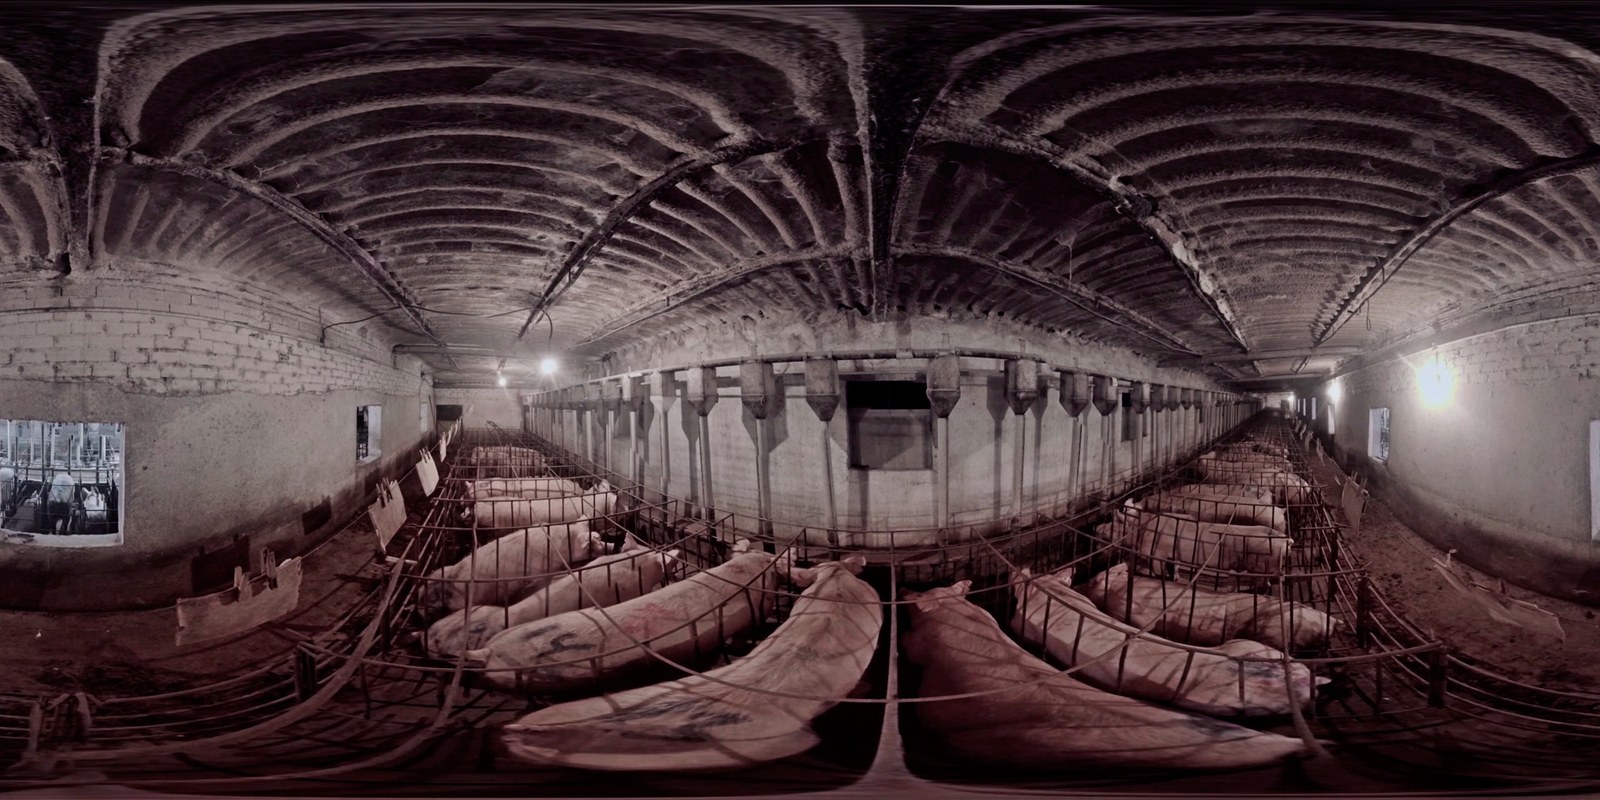 360degree image of pigs in a factory farm in Spain